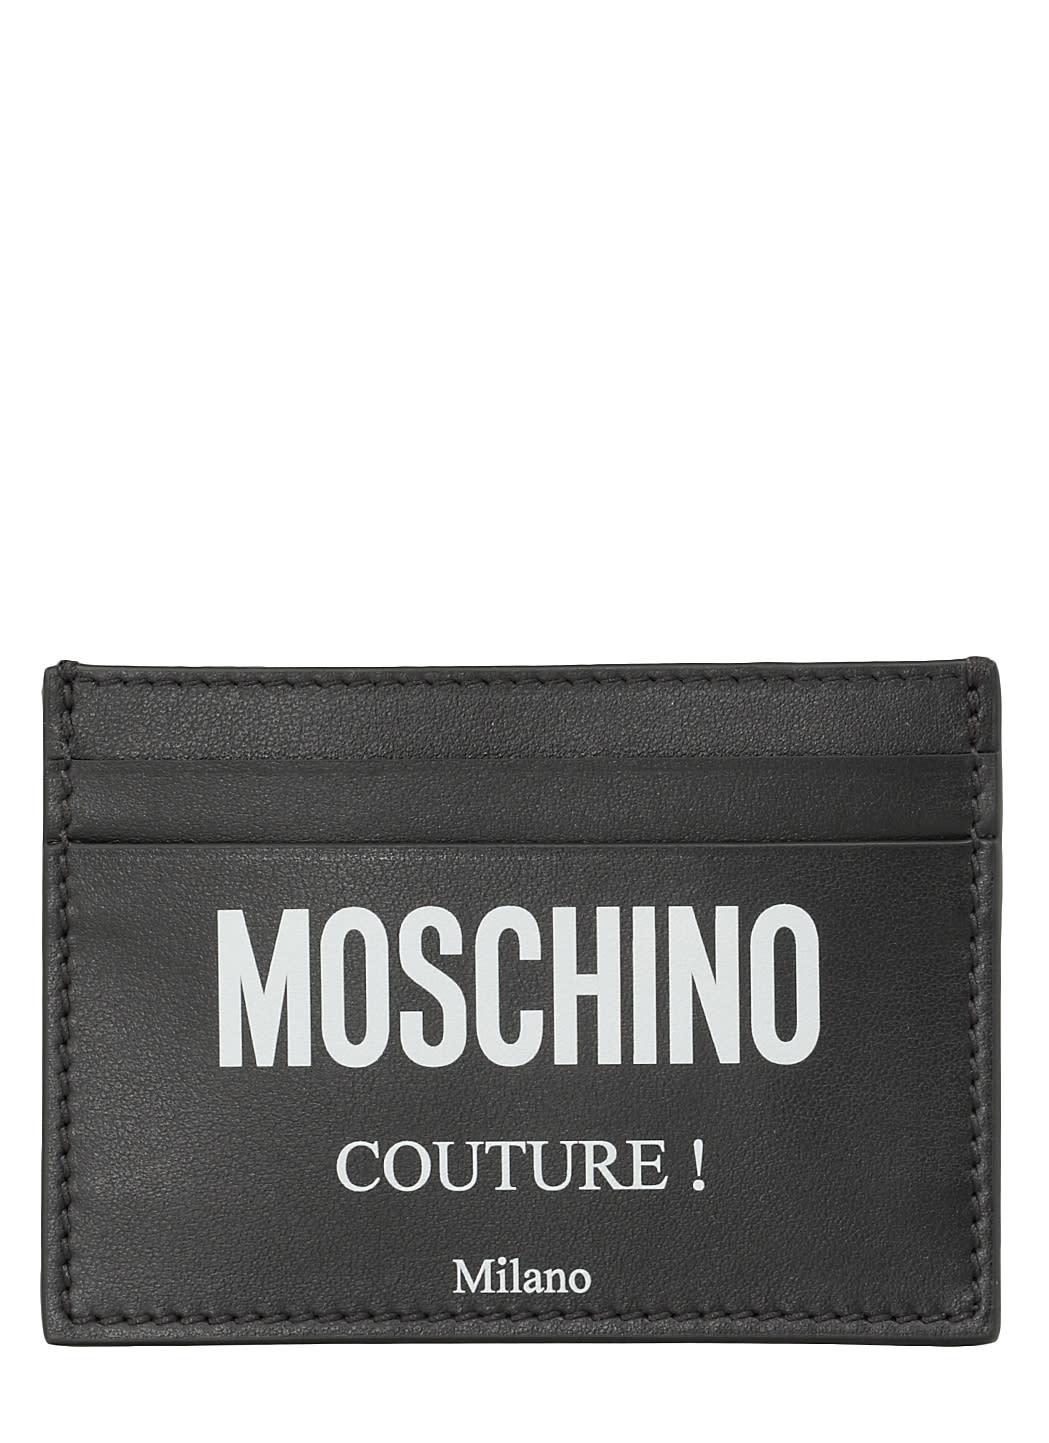 Moschino Couture Credit Card Holder